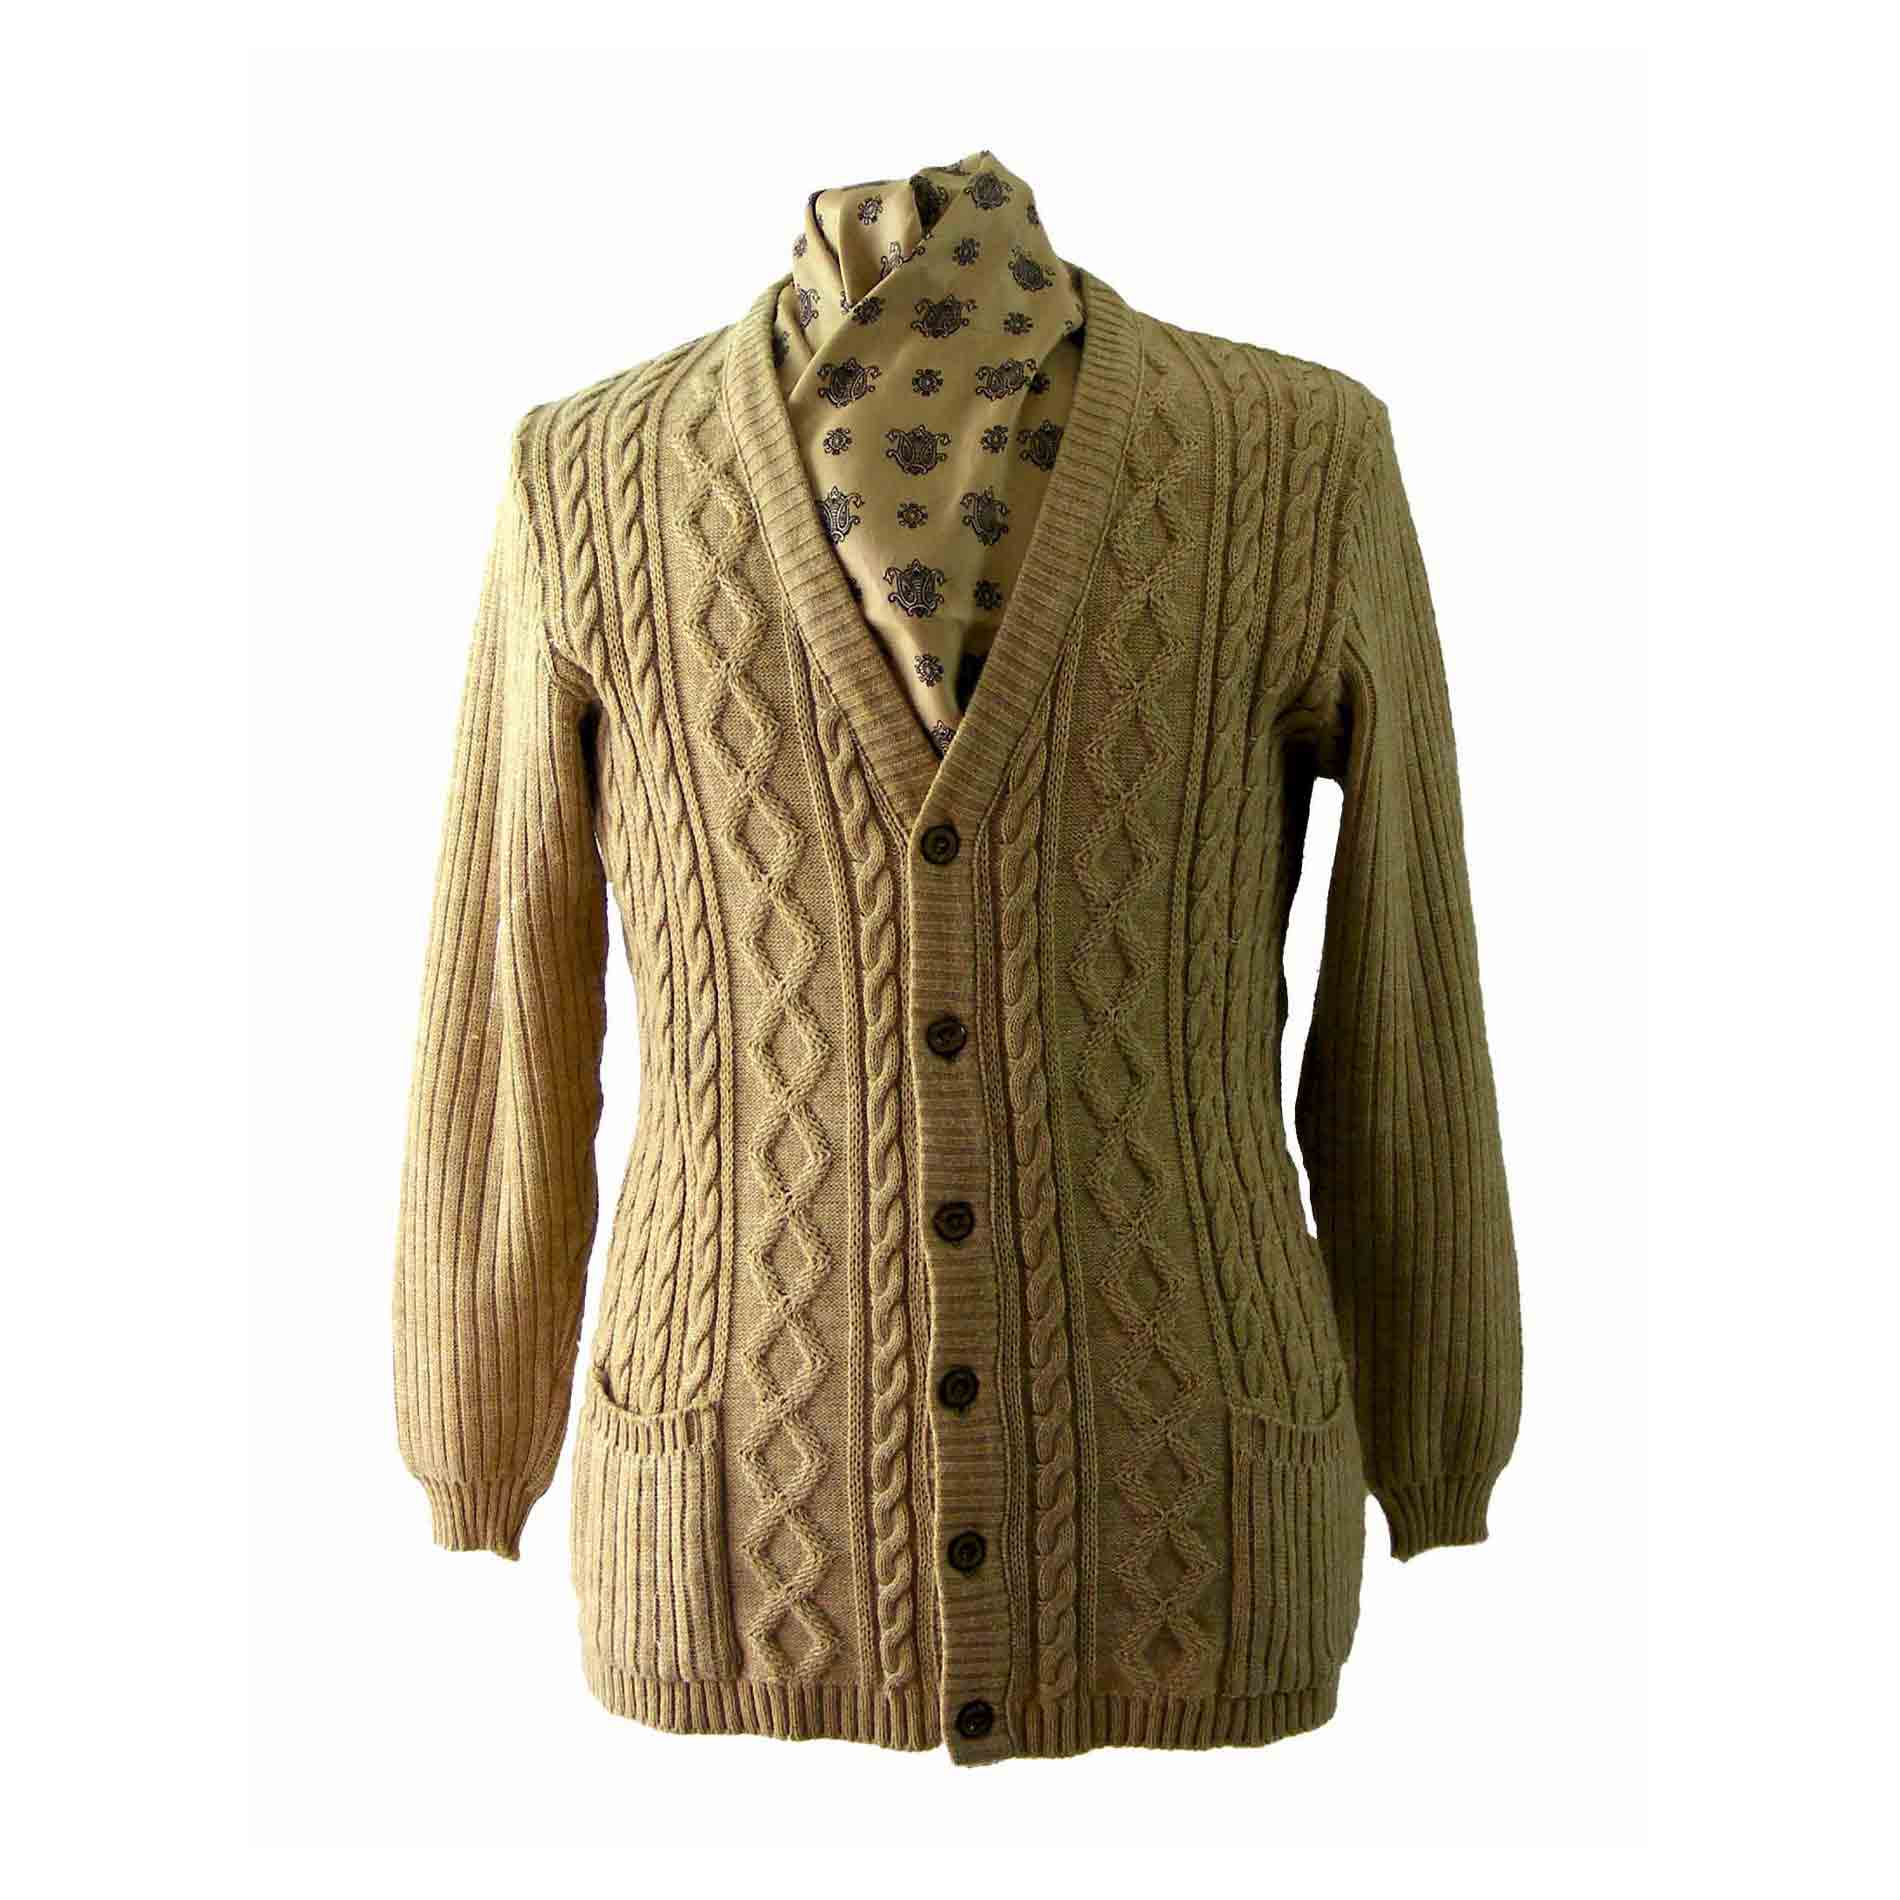 70s Beige Cable Knit Cardigan - Blue 17 Vintage Clothing